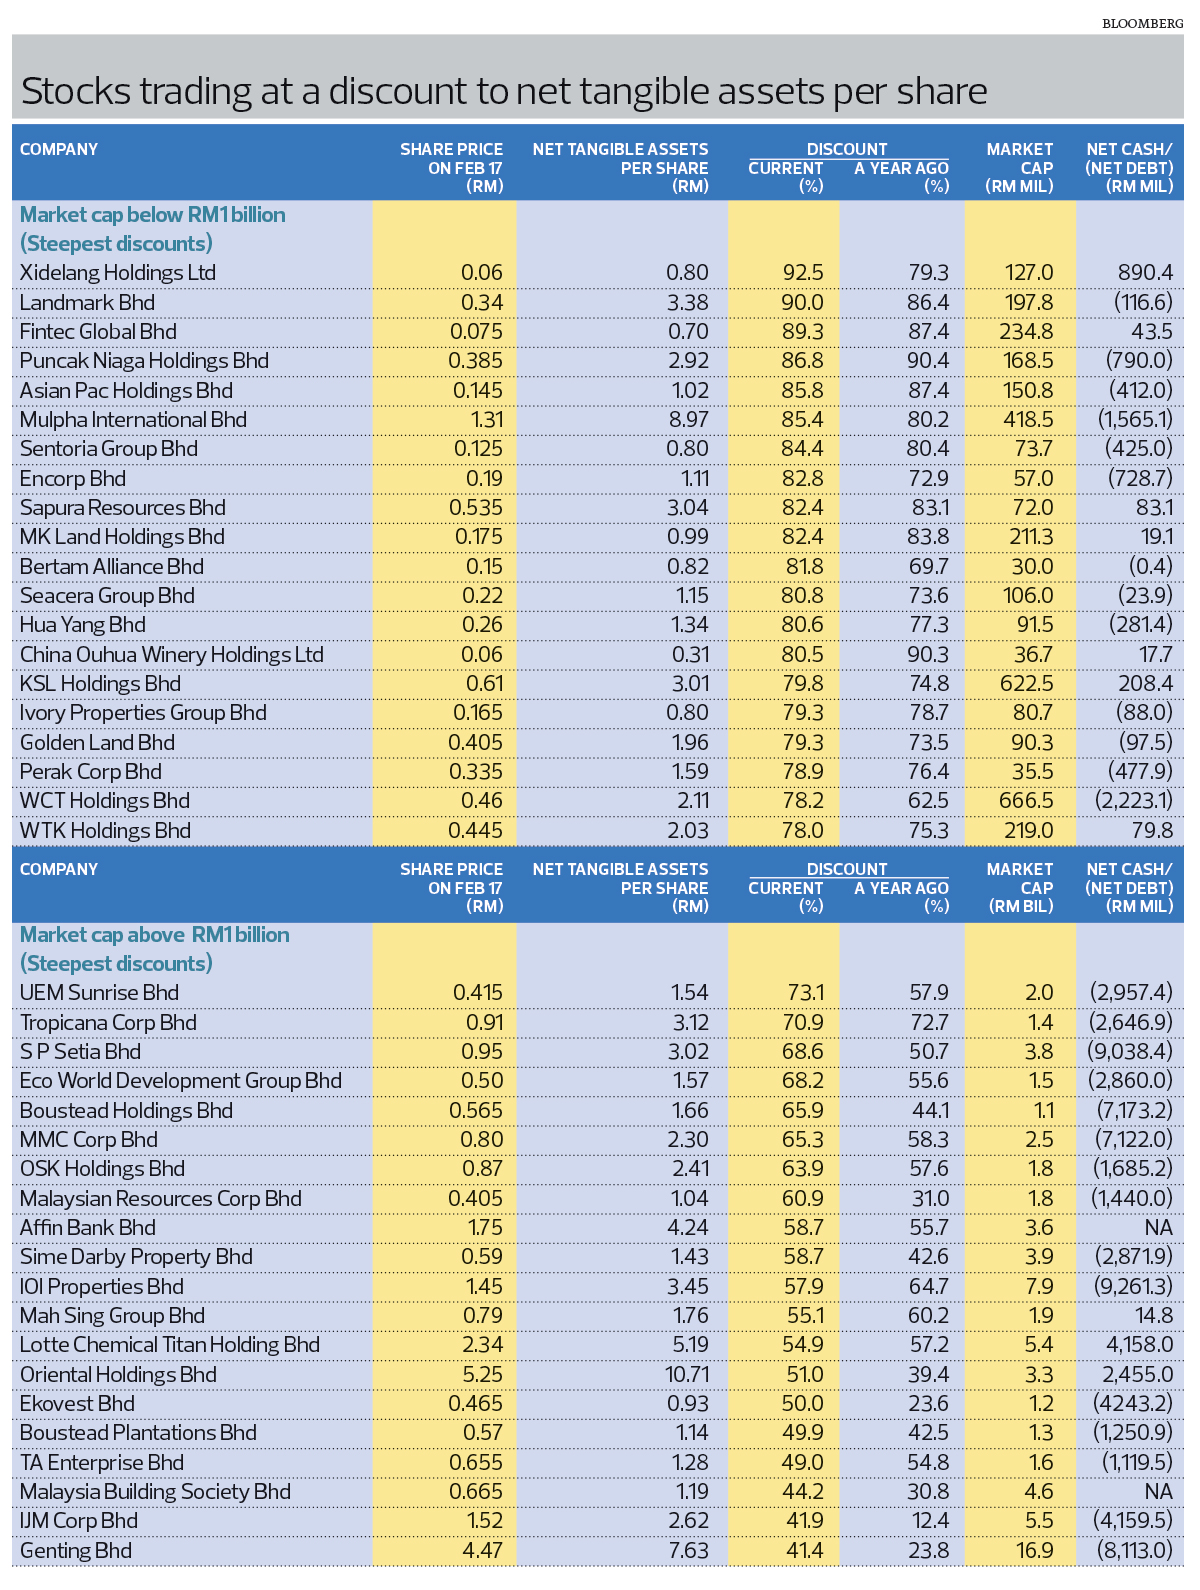 undervalued stocks in malaysia 2019